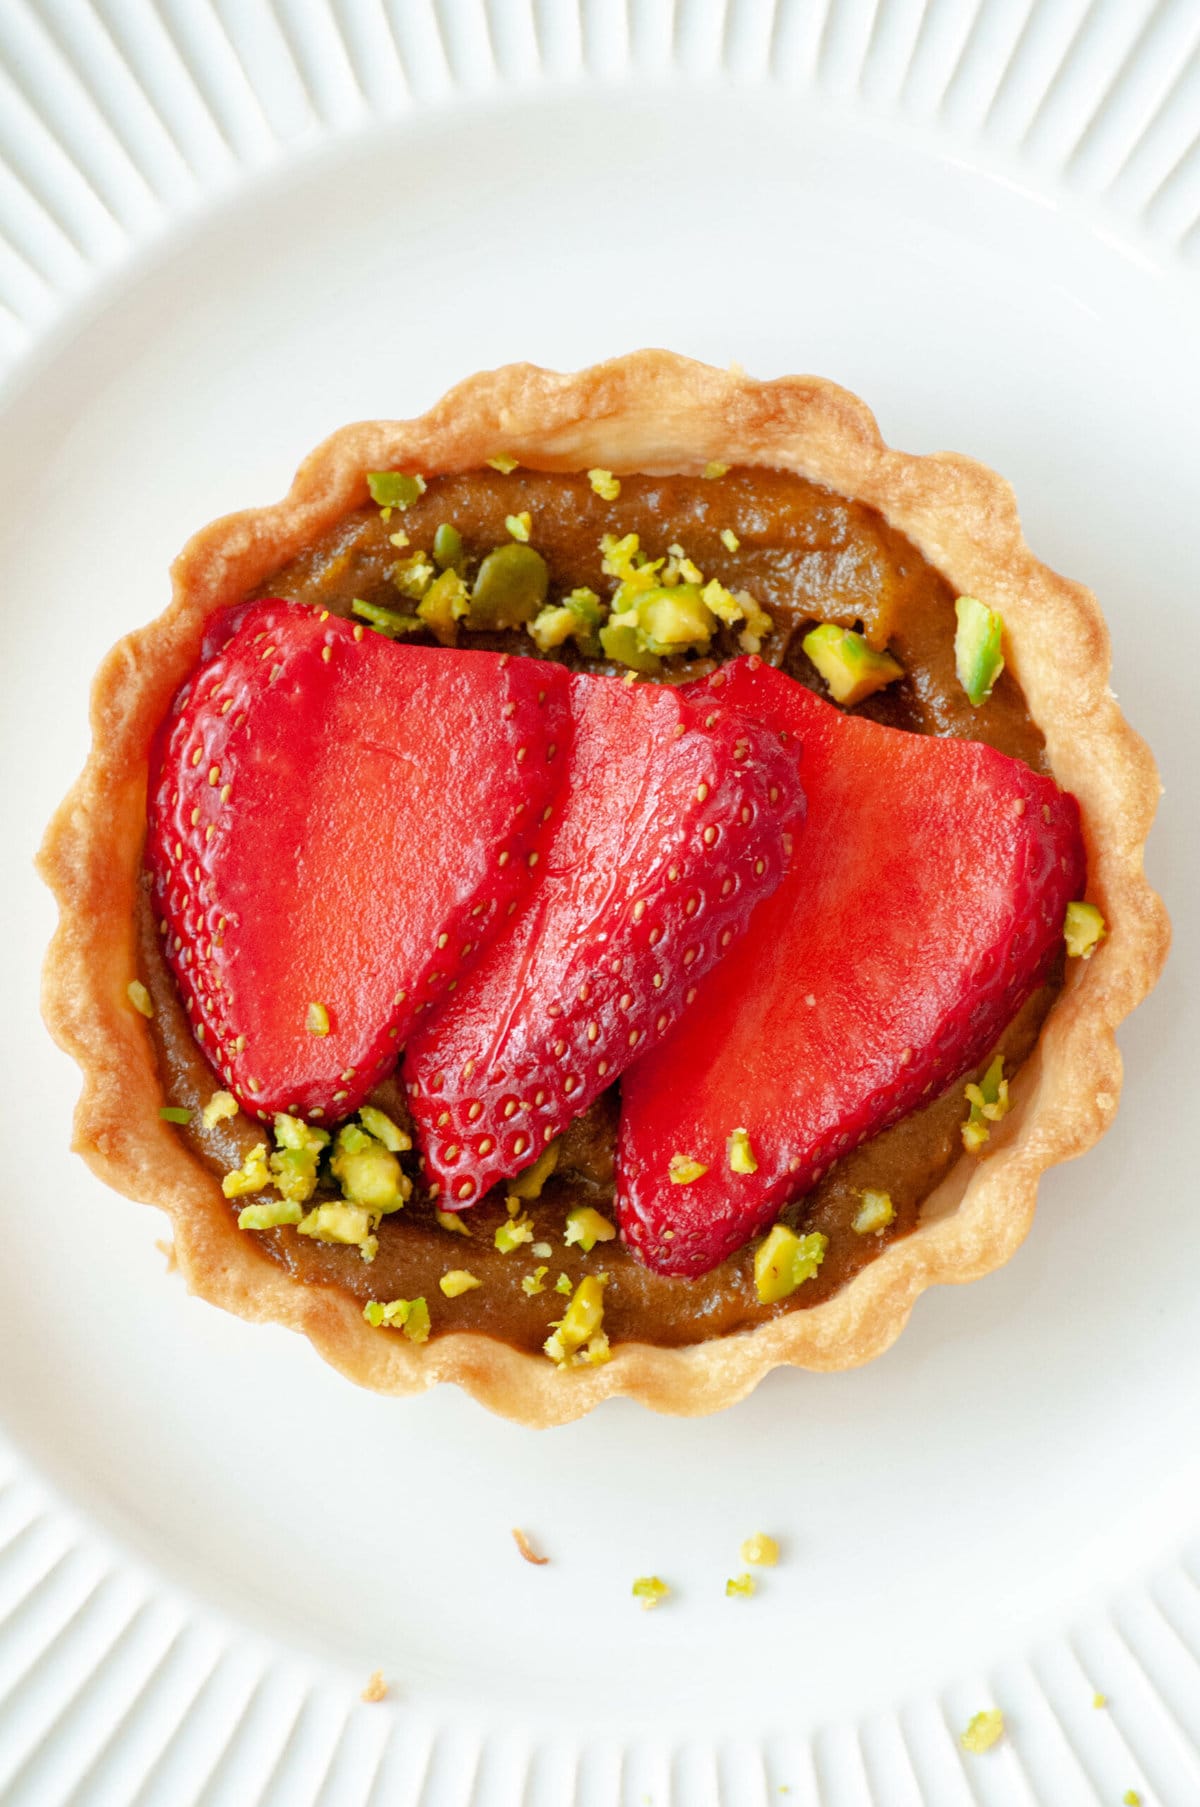 Zoom in on one of our strawberry pistachio tarts.